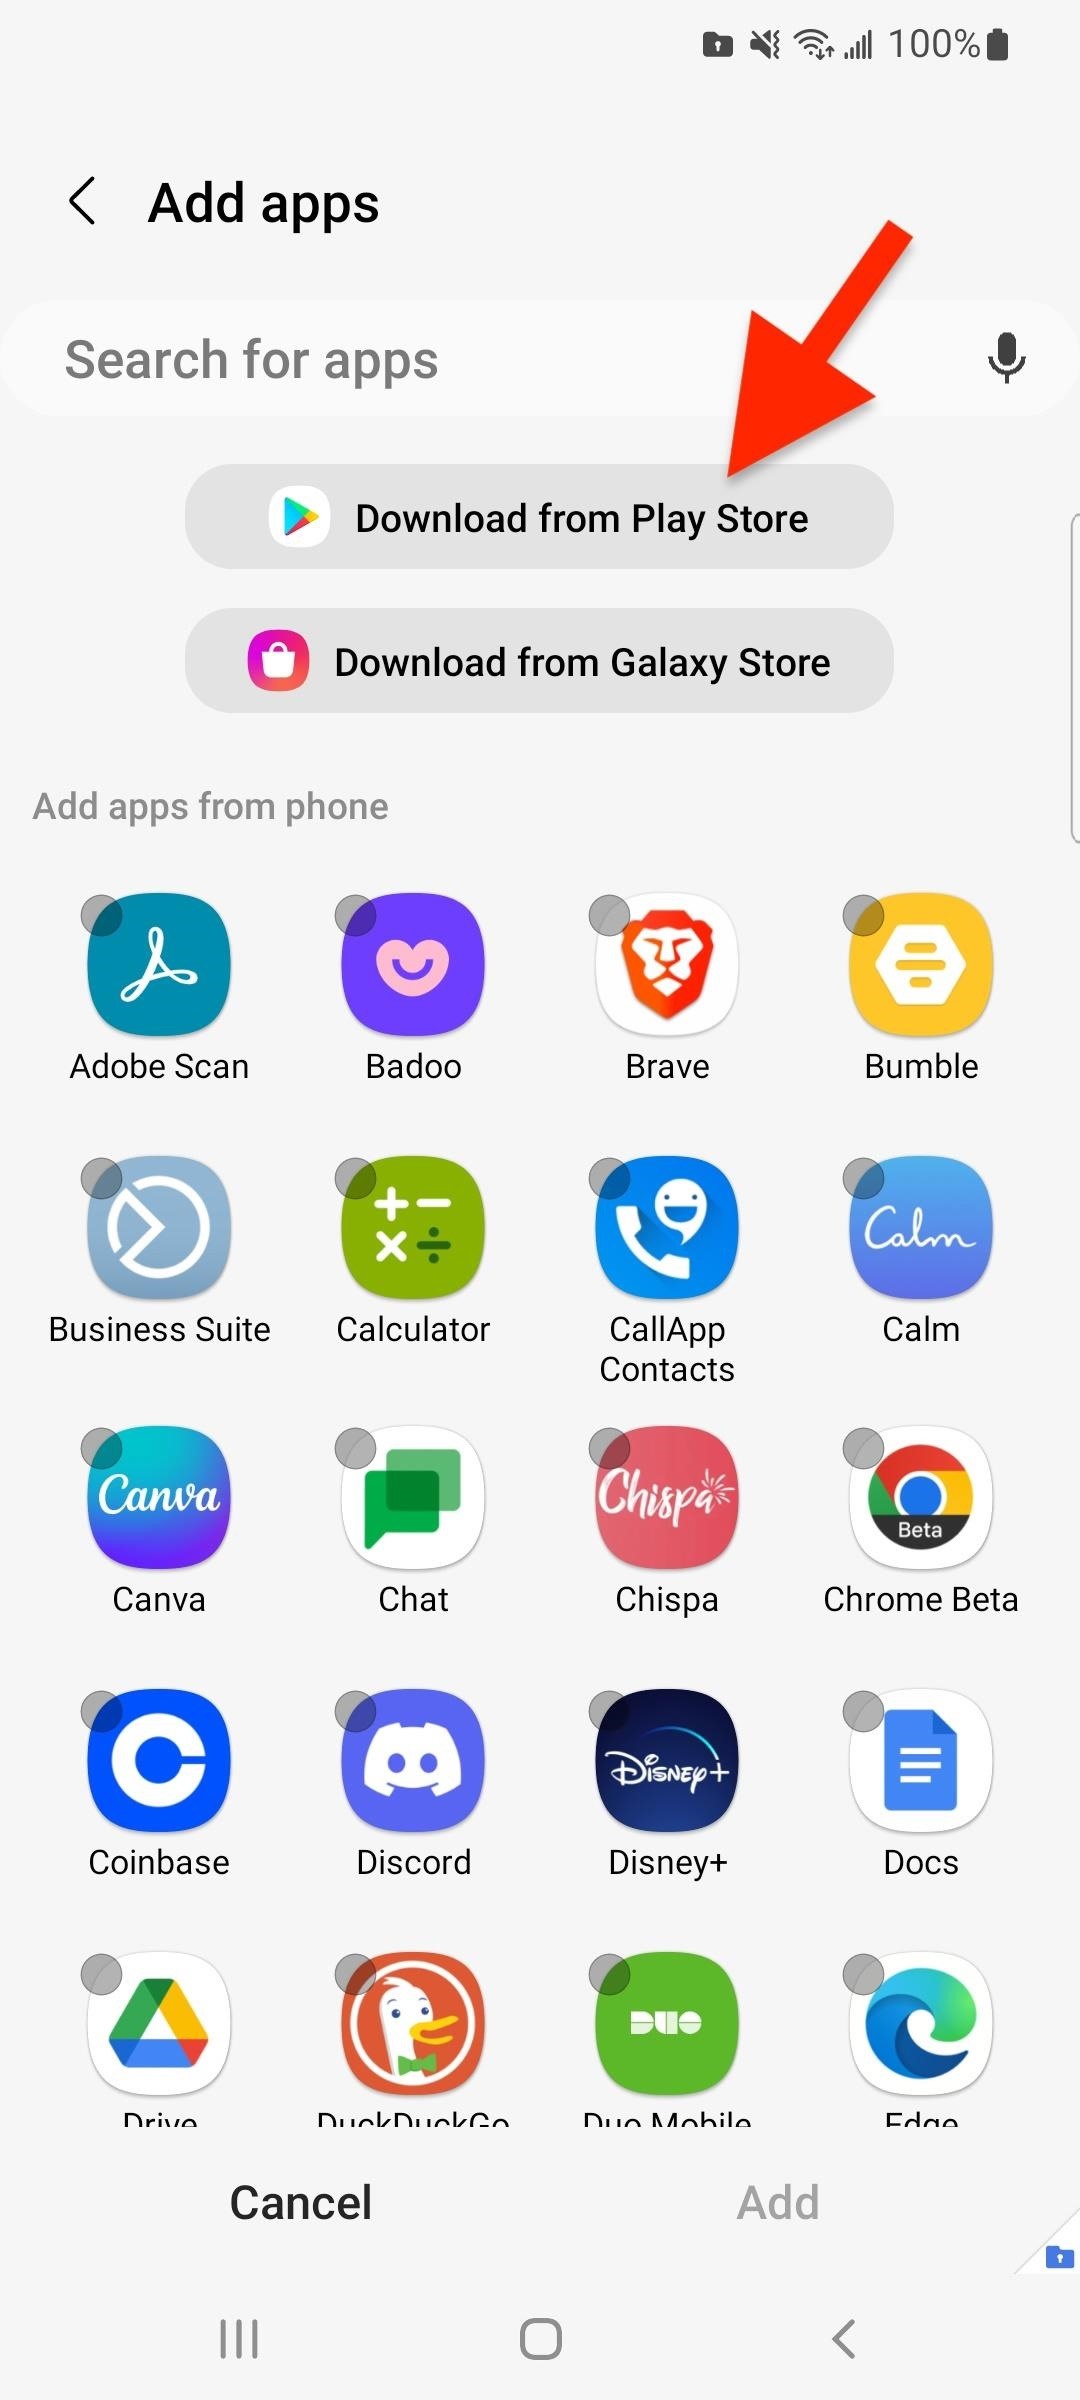 How to Clone Any Android App on Your Samsung Galaxy Phone Without Using Any Third-Party Tools